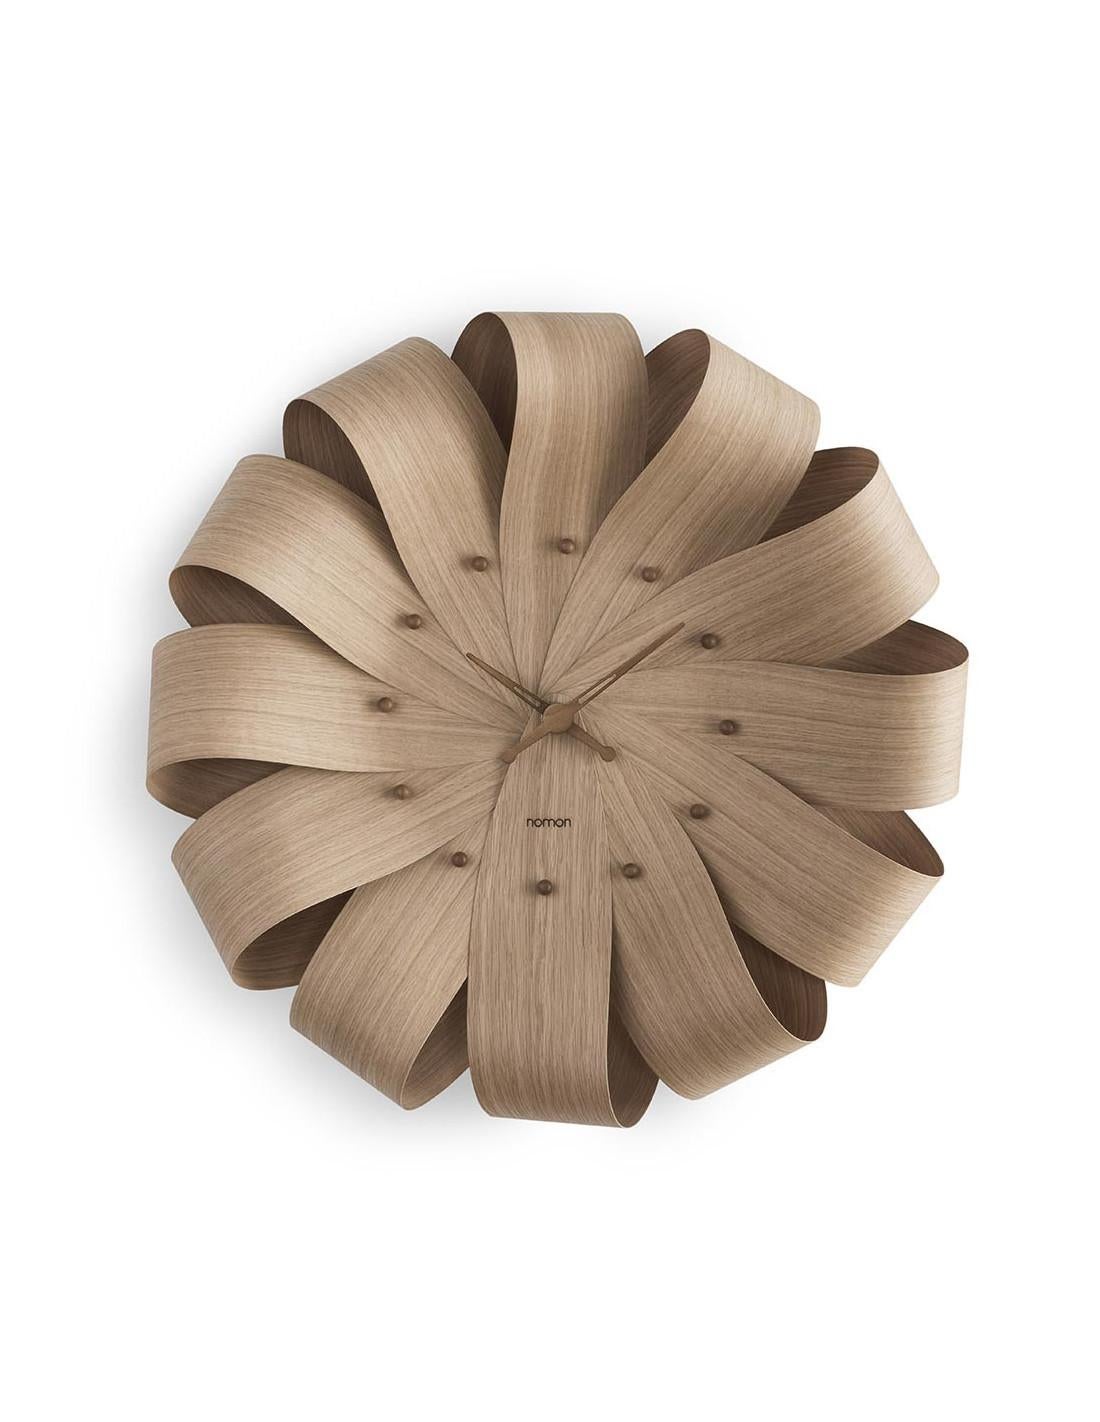 The Brisa wall clock is composed of natural walnut or oak leaves and its hands are available crafted in walnut, oak finish or polished brass.
Brisa wall clock: Body in walnut wood or Oak wood or both walnut and Oak wood, hands and time signals in